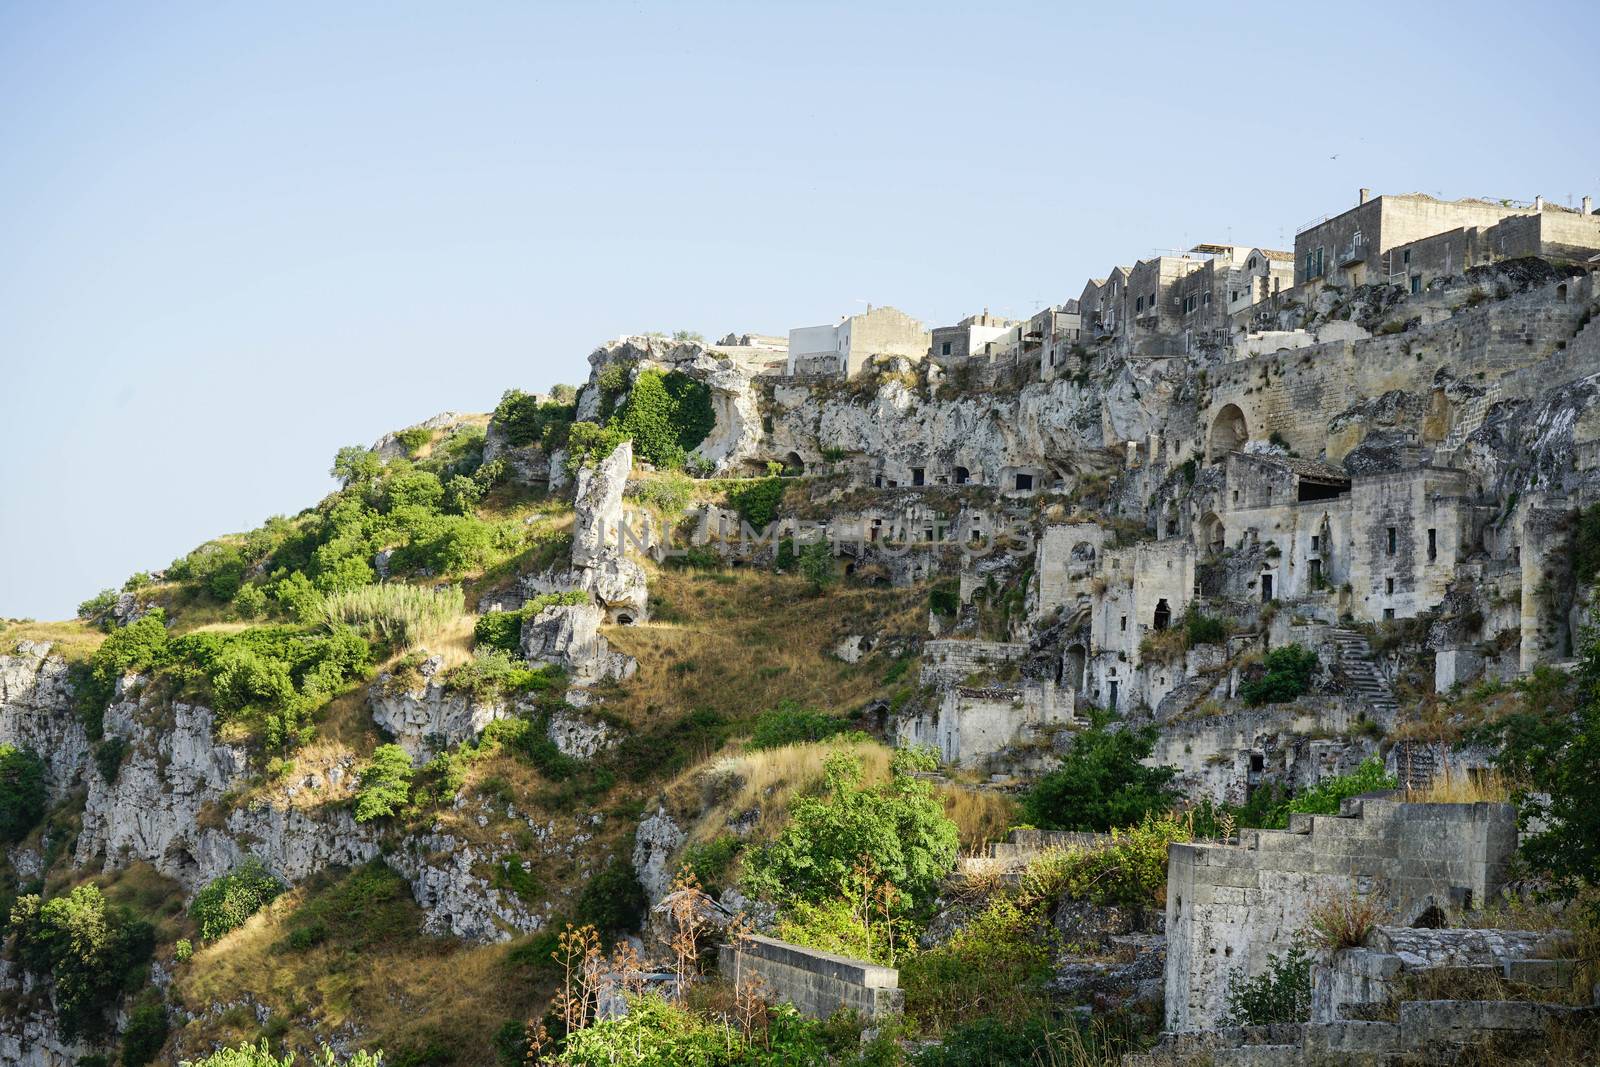 Residences at the Sassi of Matera by cosca